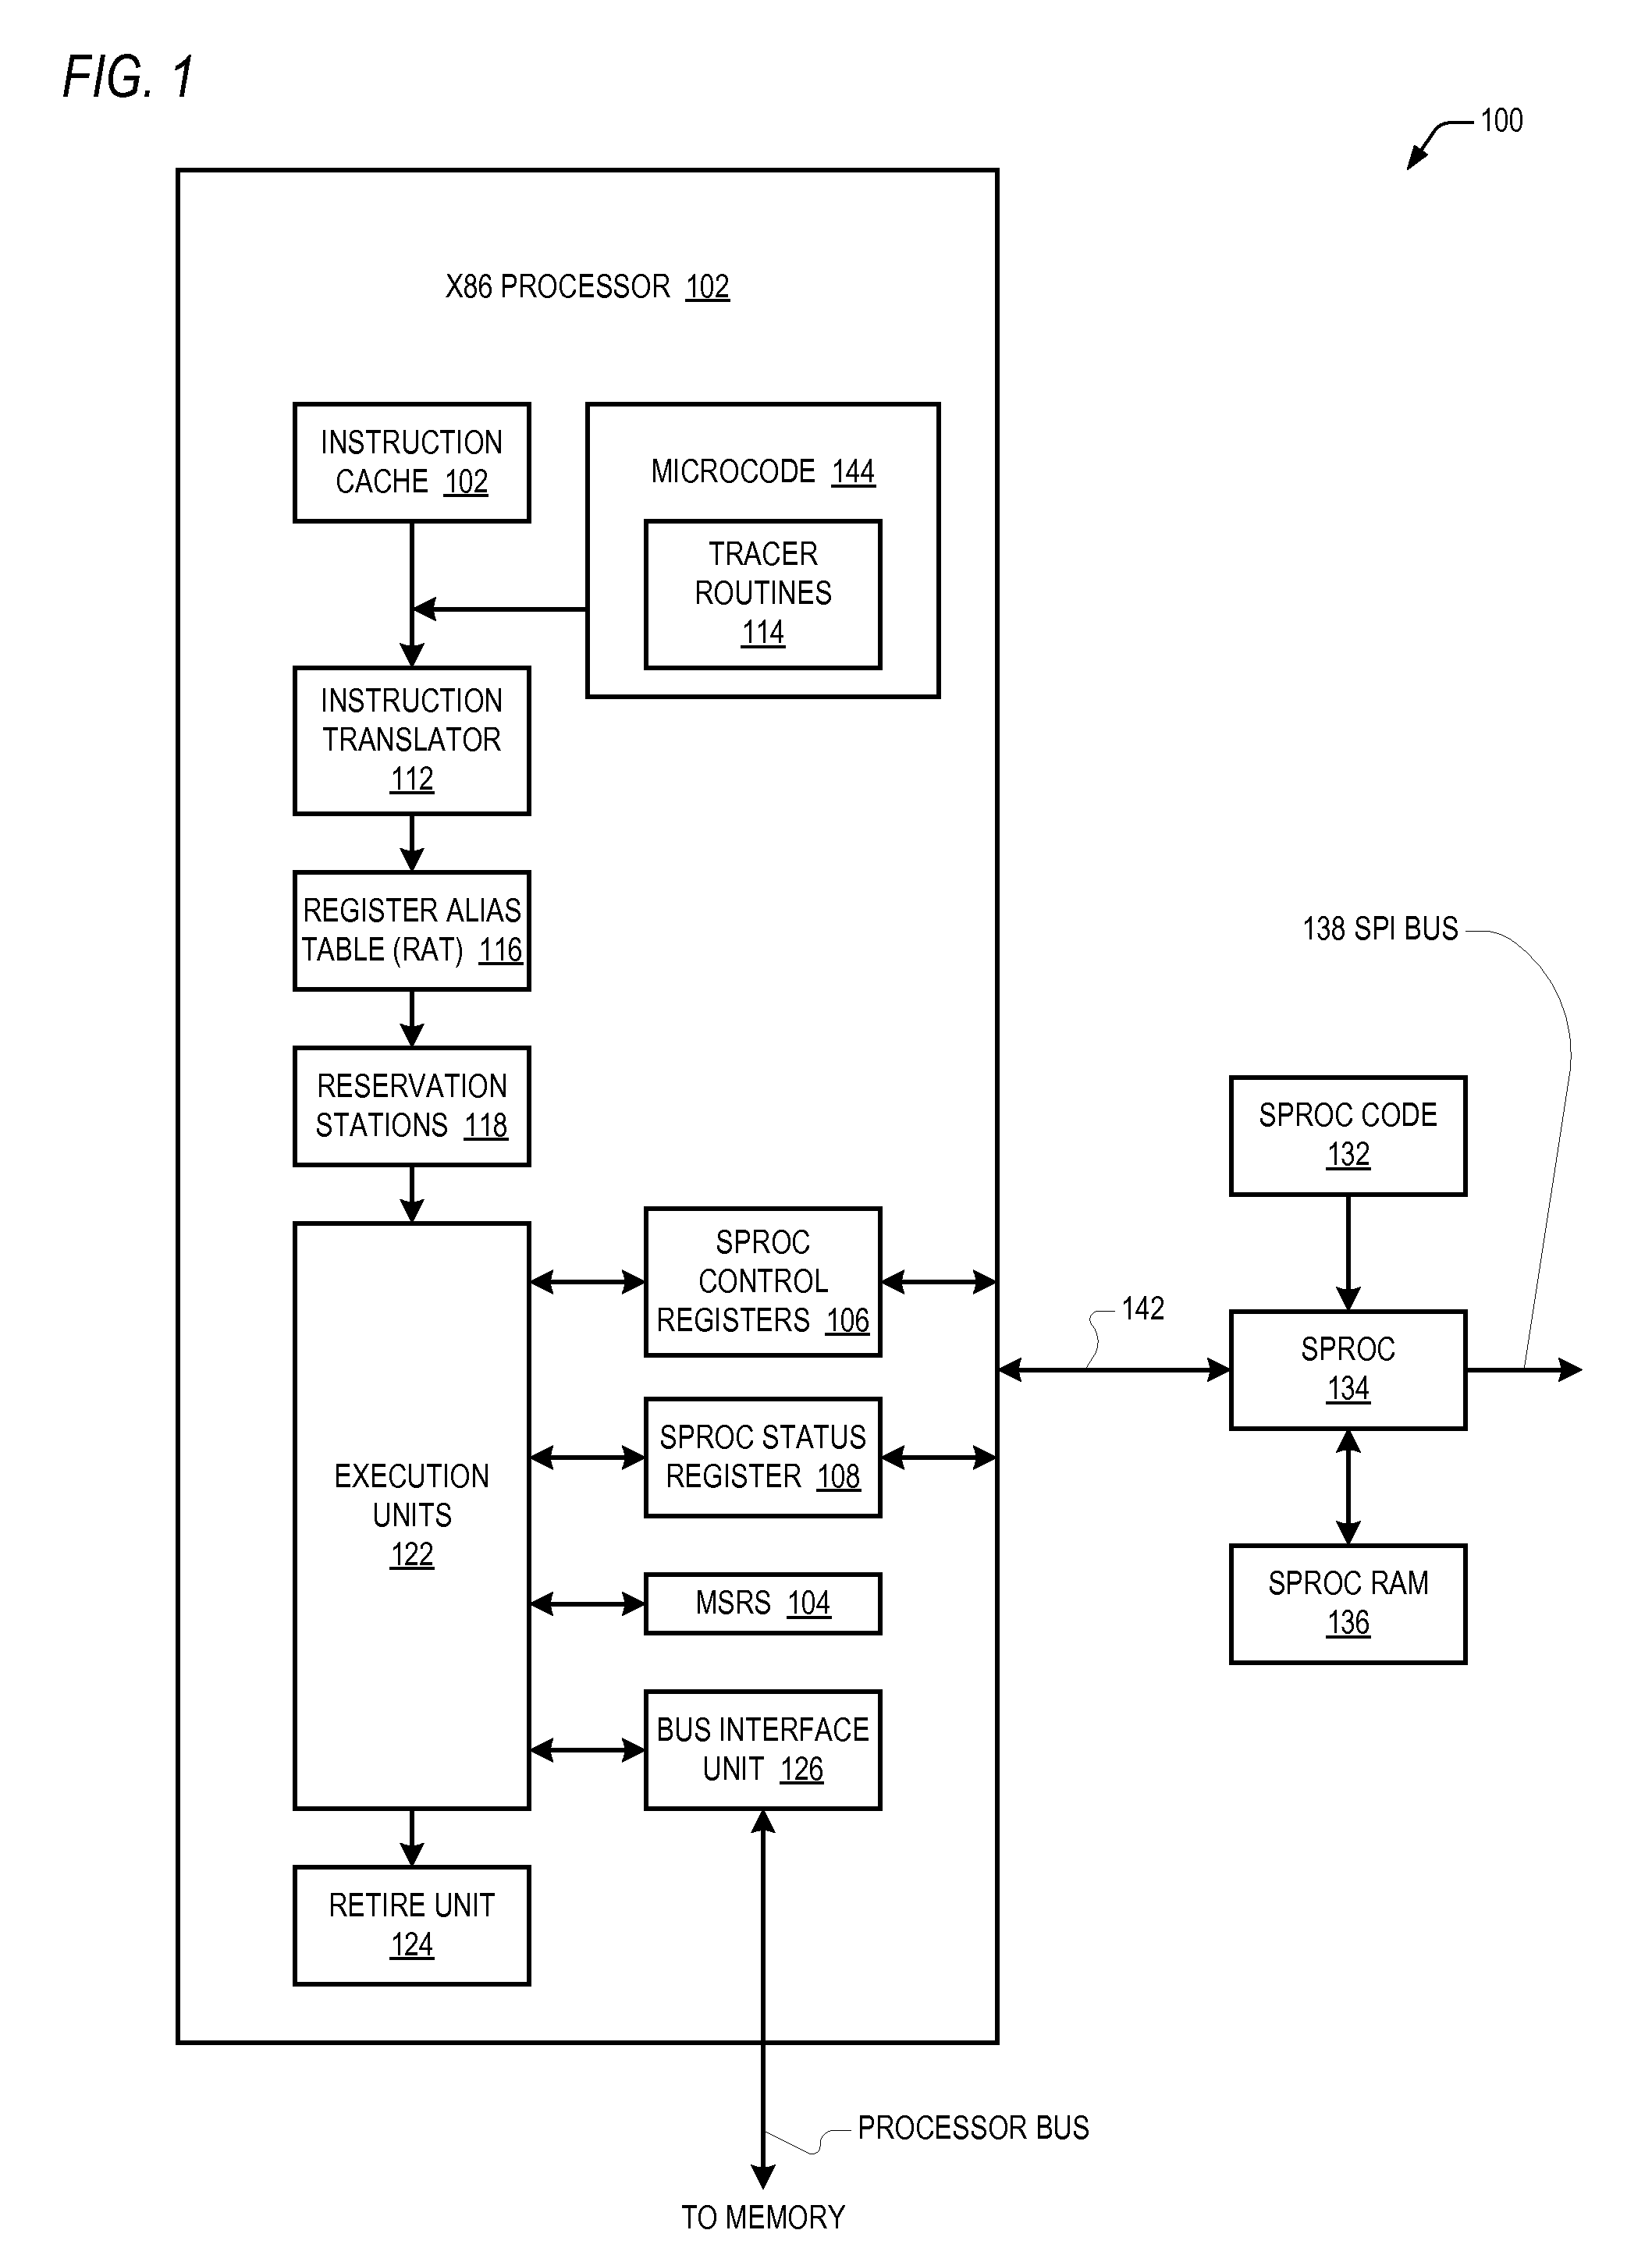 Method for generating multiple serial bus chip selects using single chip select signal and modulation of clock signal frequency